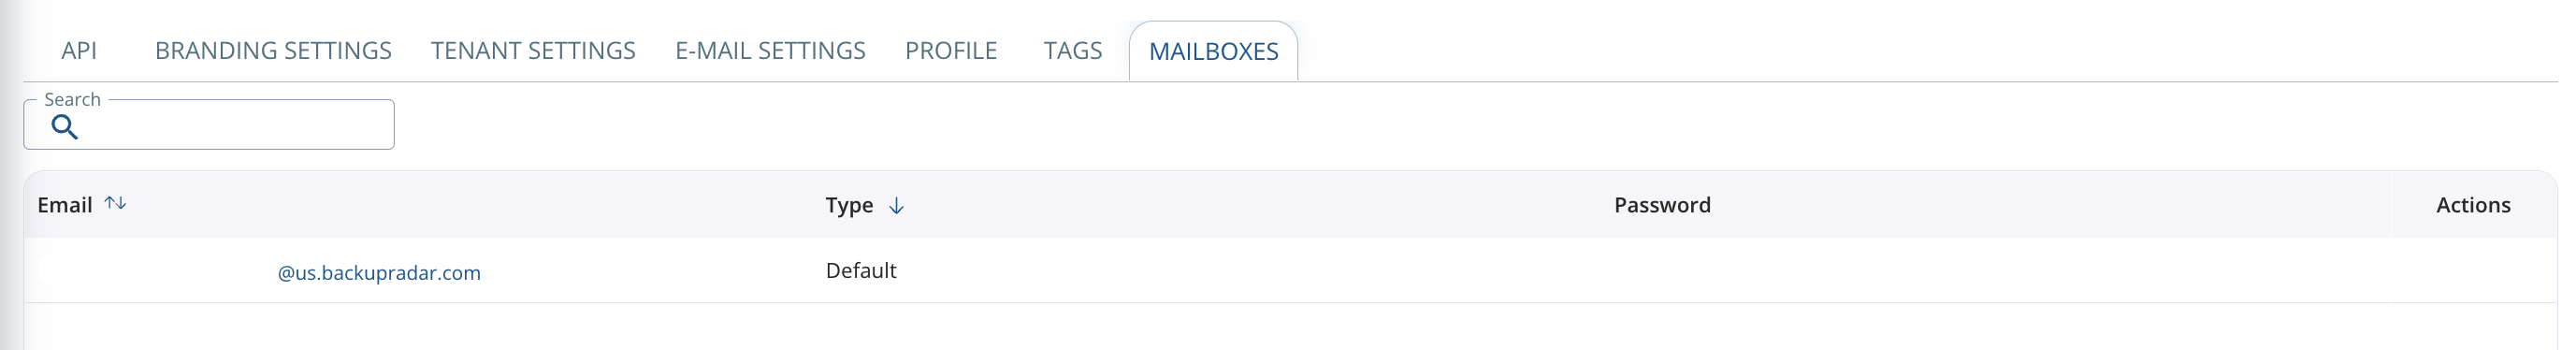 NewMailbox.png